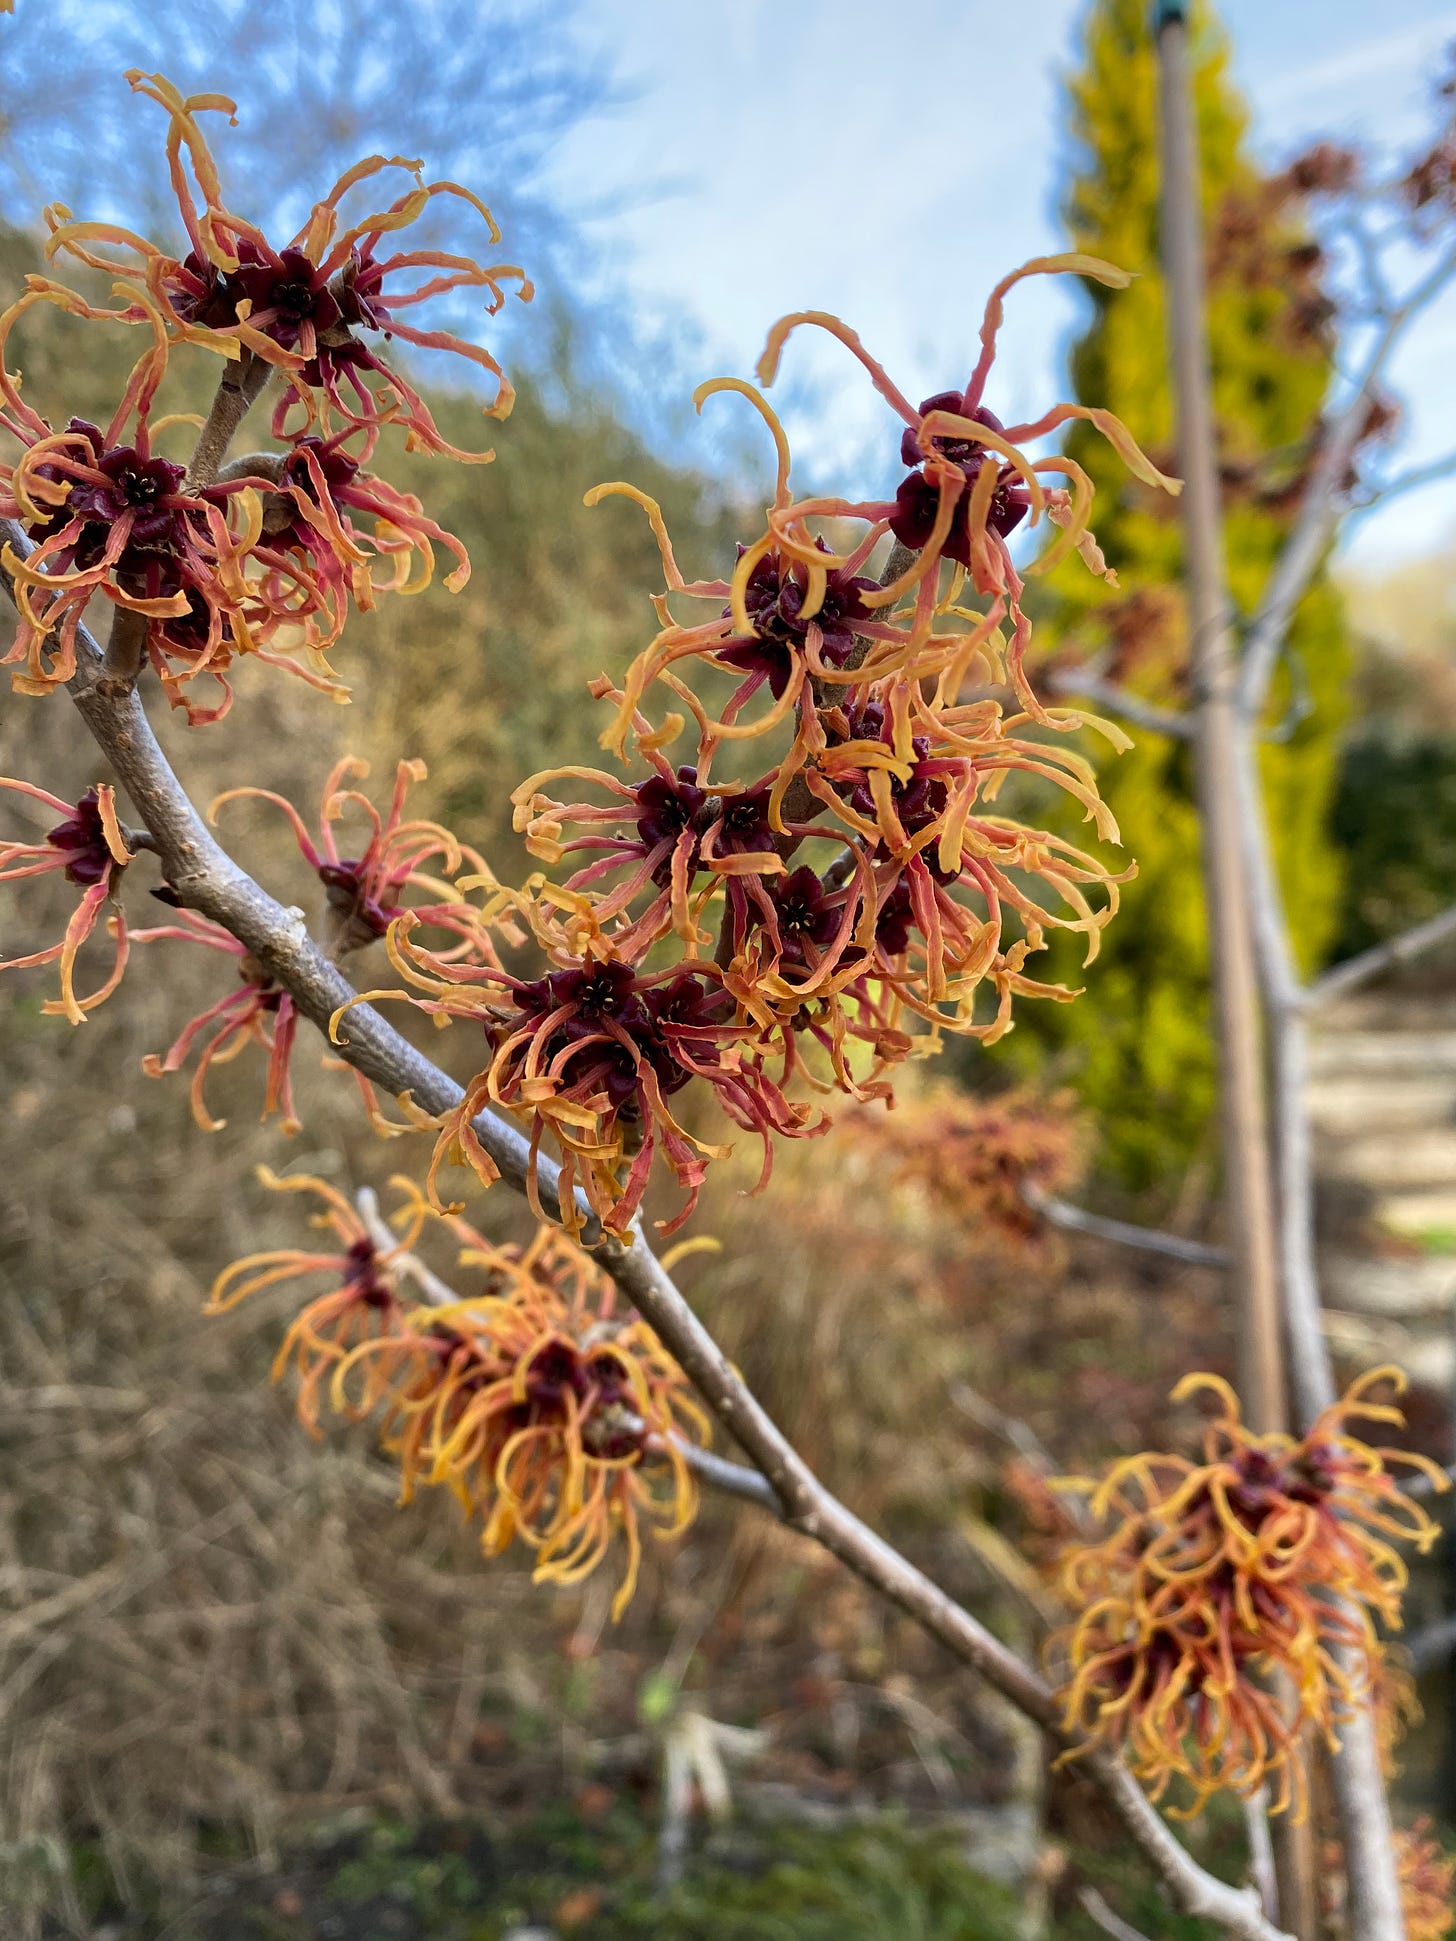 A close up photo of the spidery yellow-orange-red flowers of witch hazel.